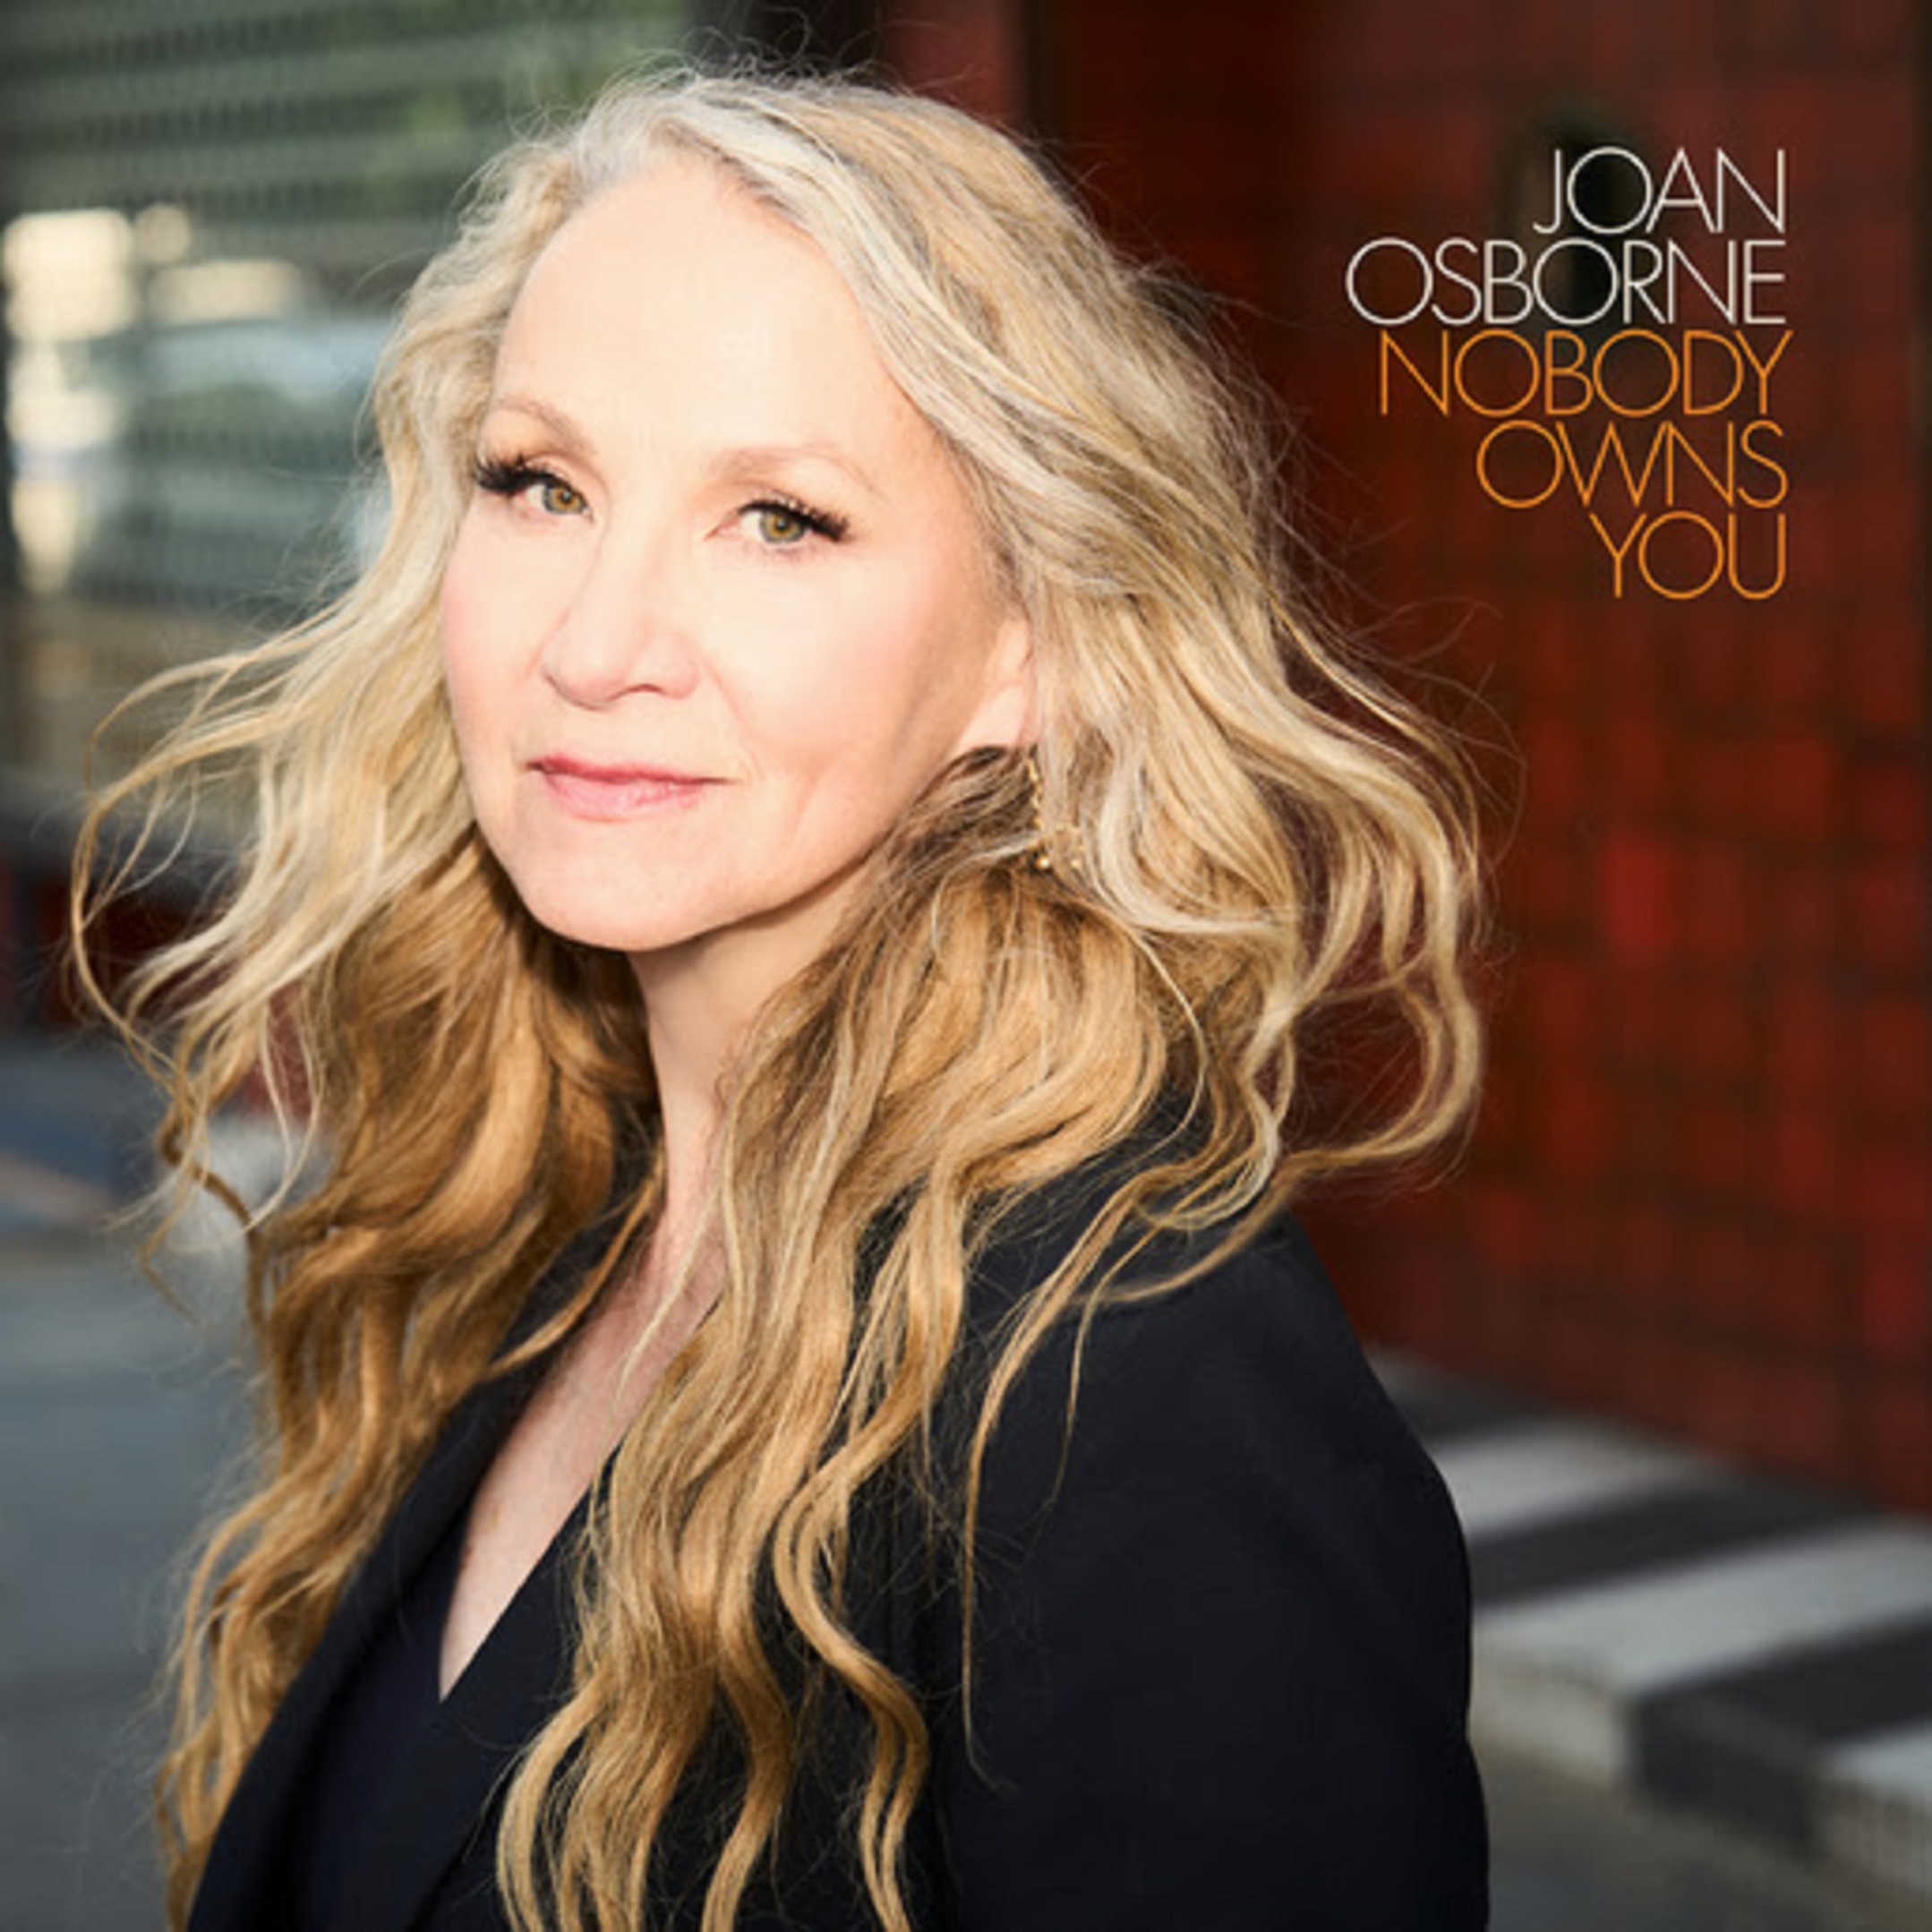 Joan Osborne Releases Captivating Video For "Great American Cities"